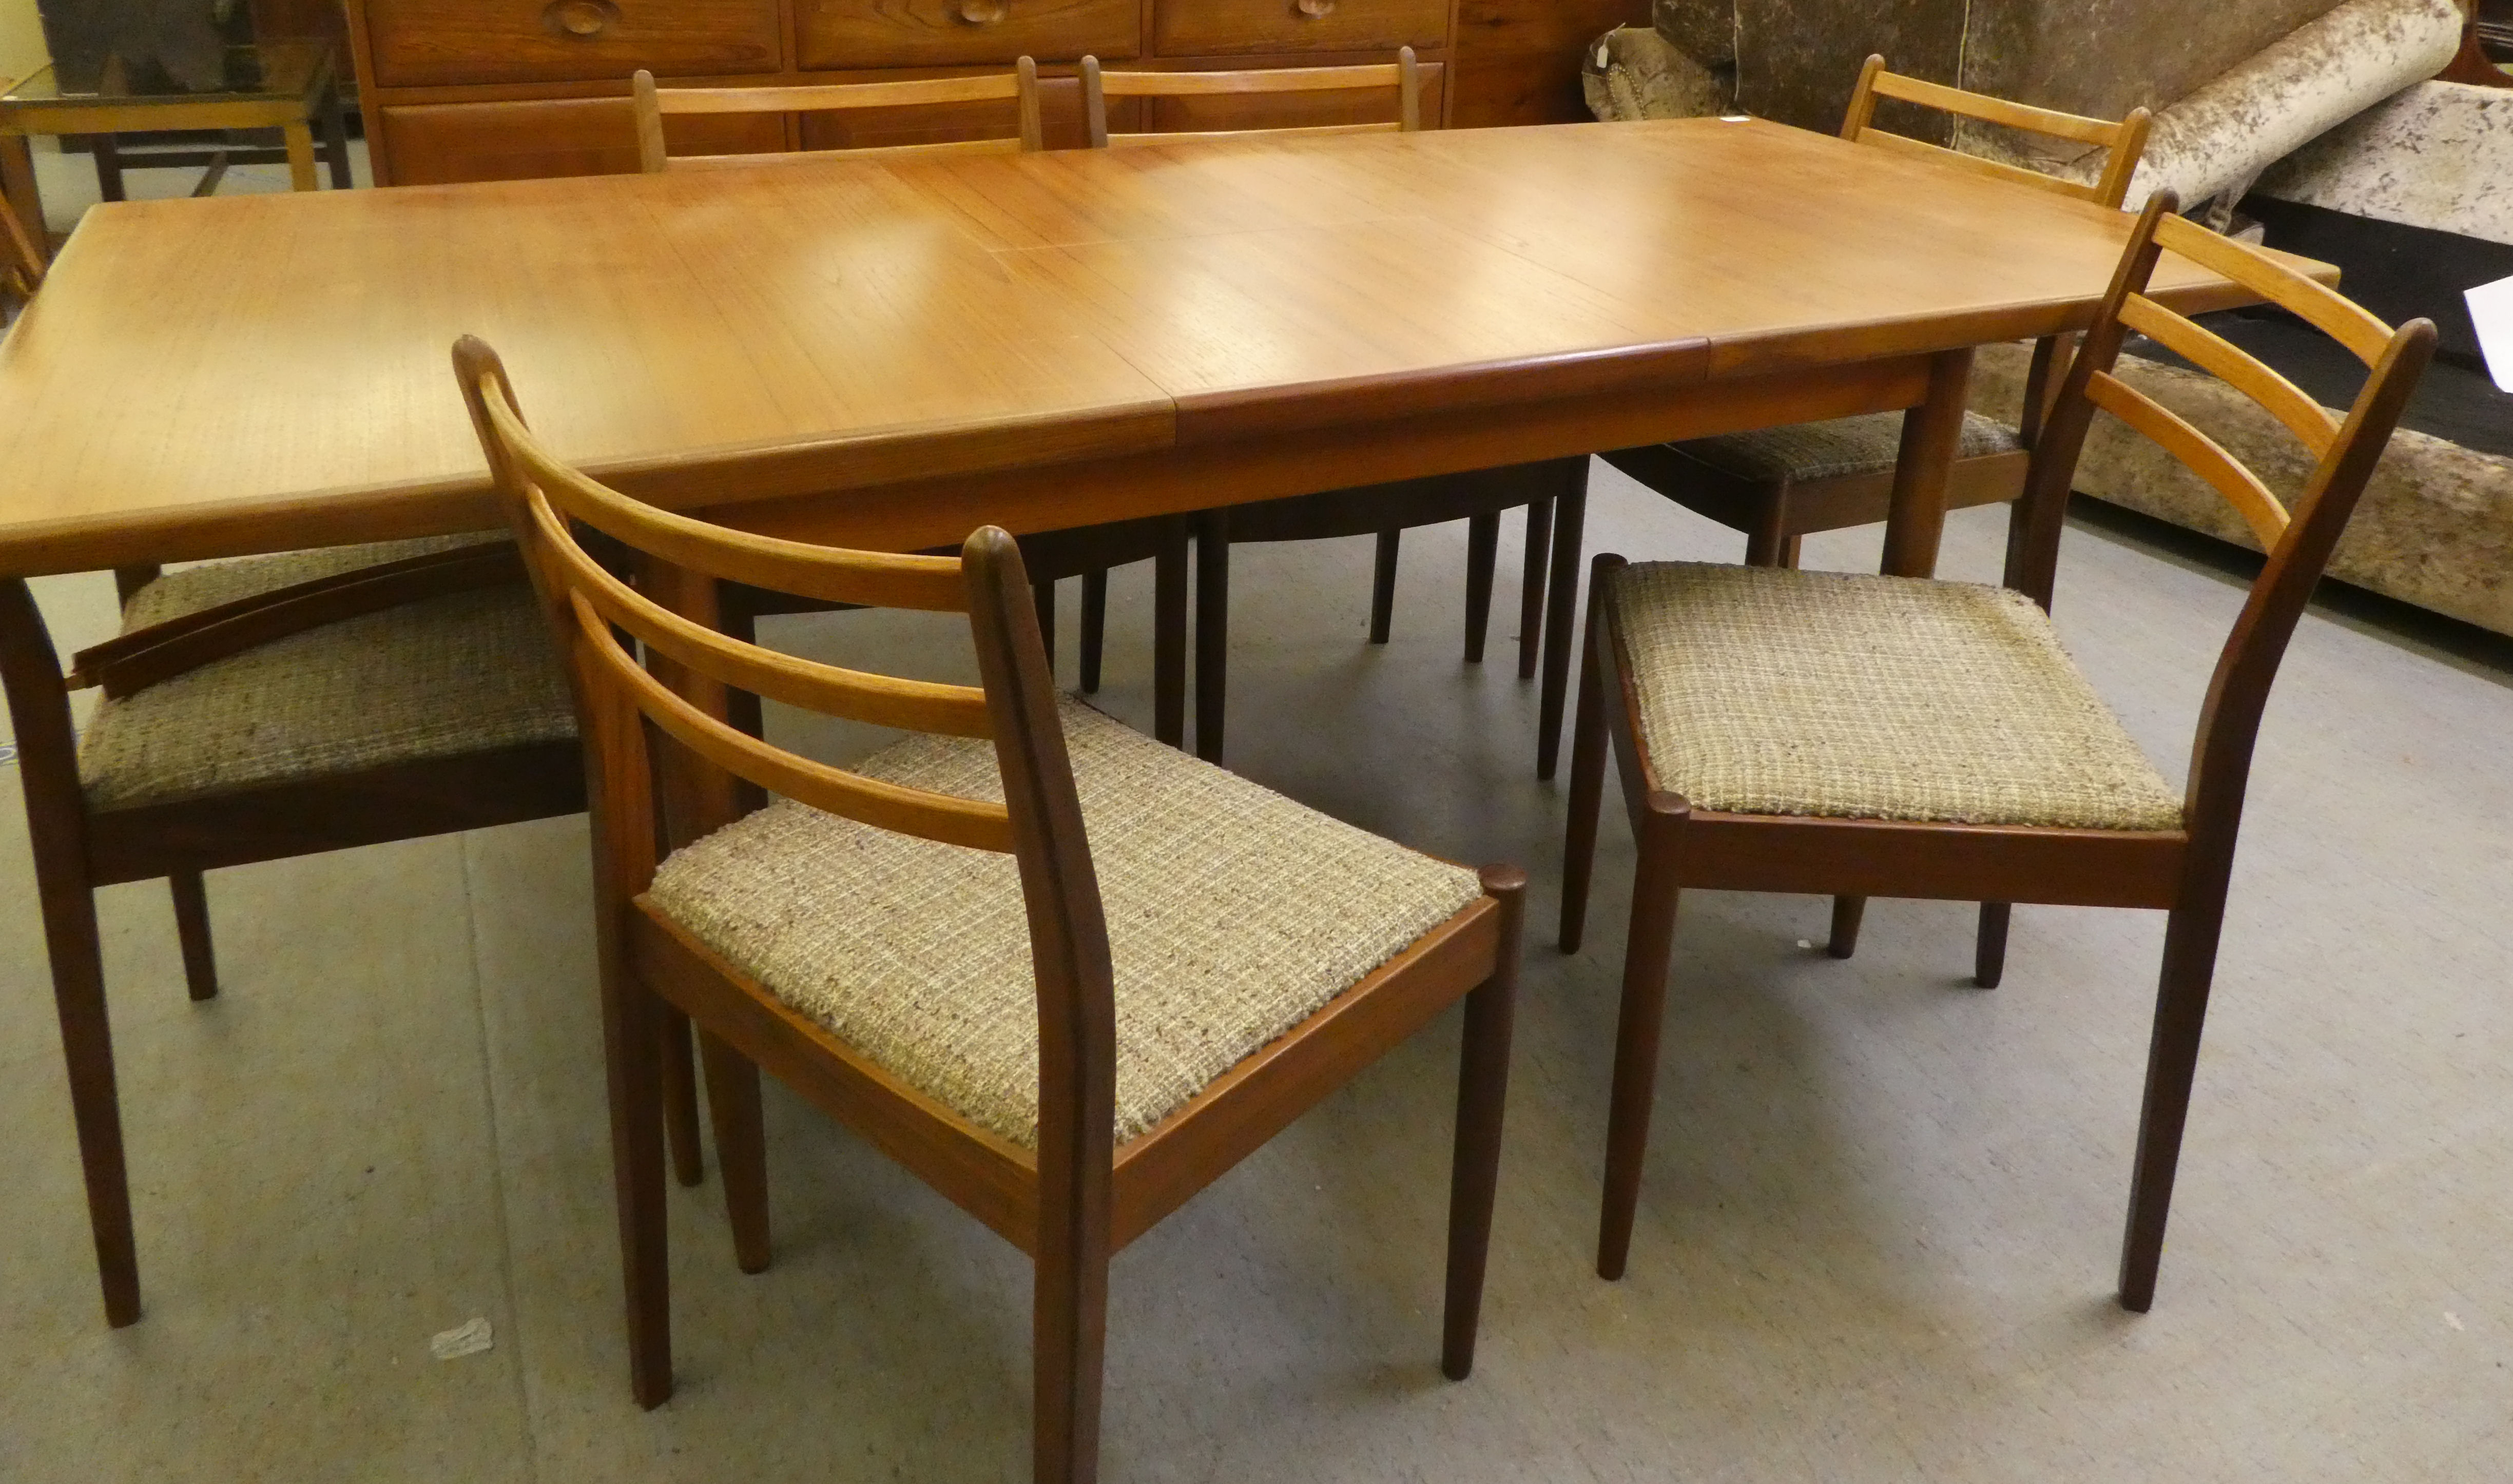 A 1970s teak G-Plan dining table, raised on turned, tapered legs  29"h  62"L extending to 80"L - Image 6 of 8